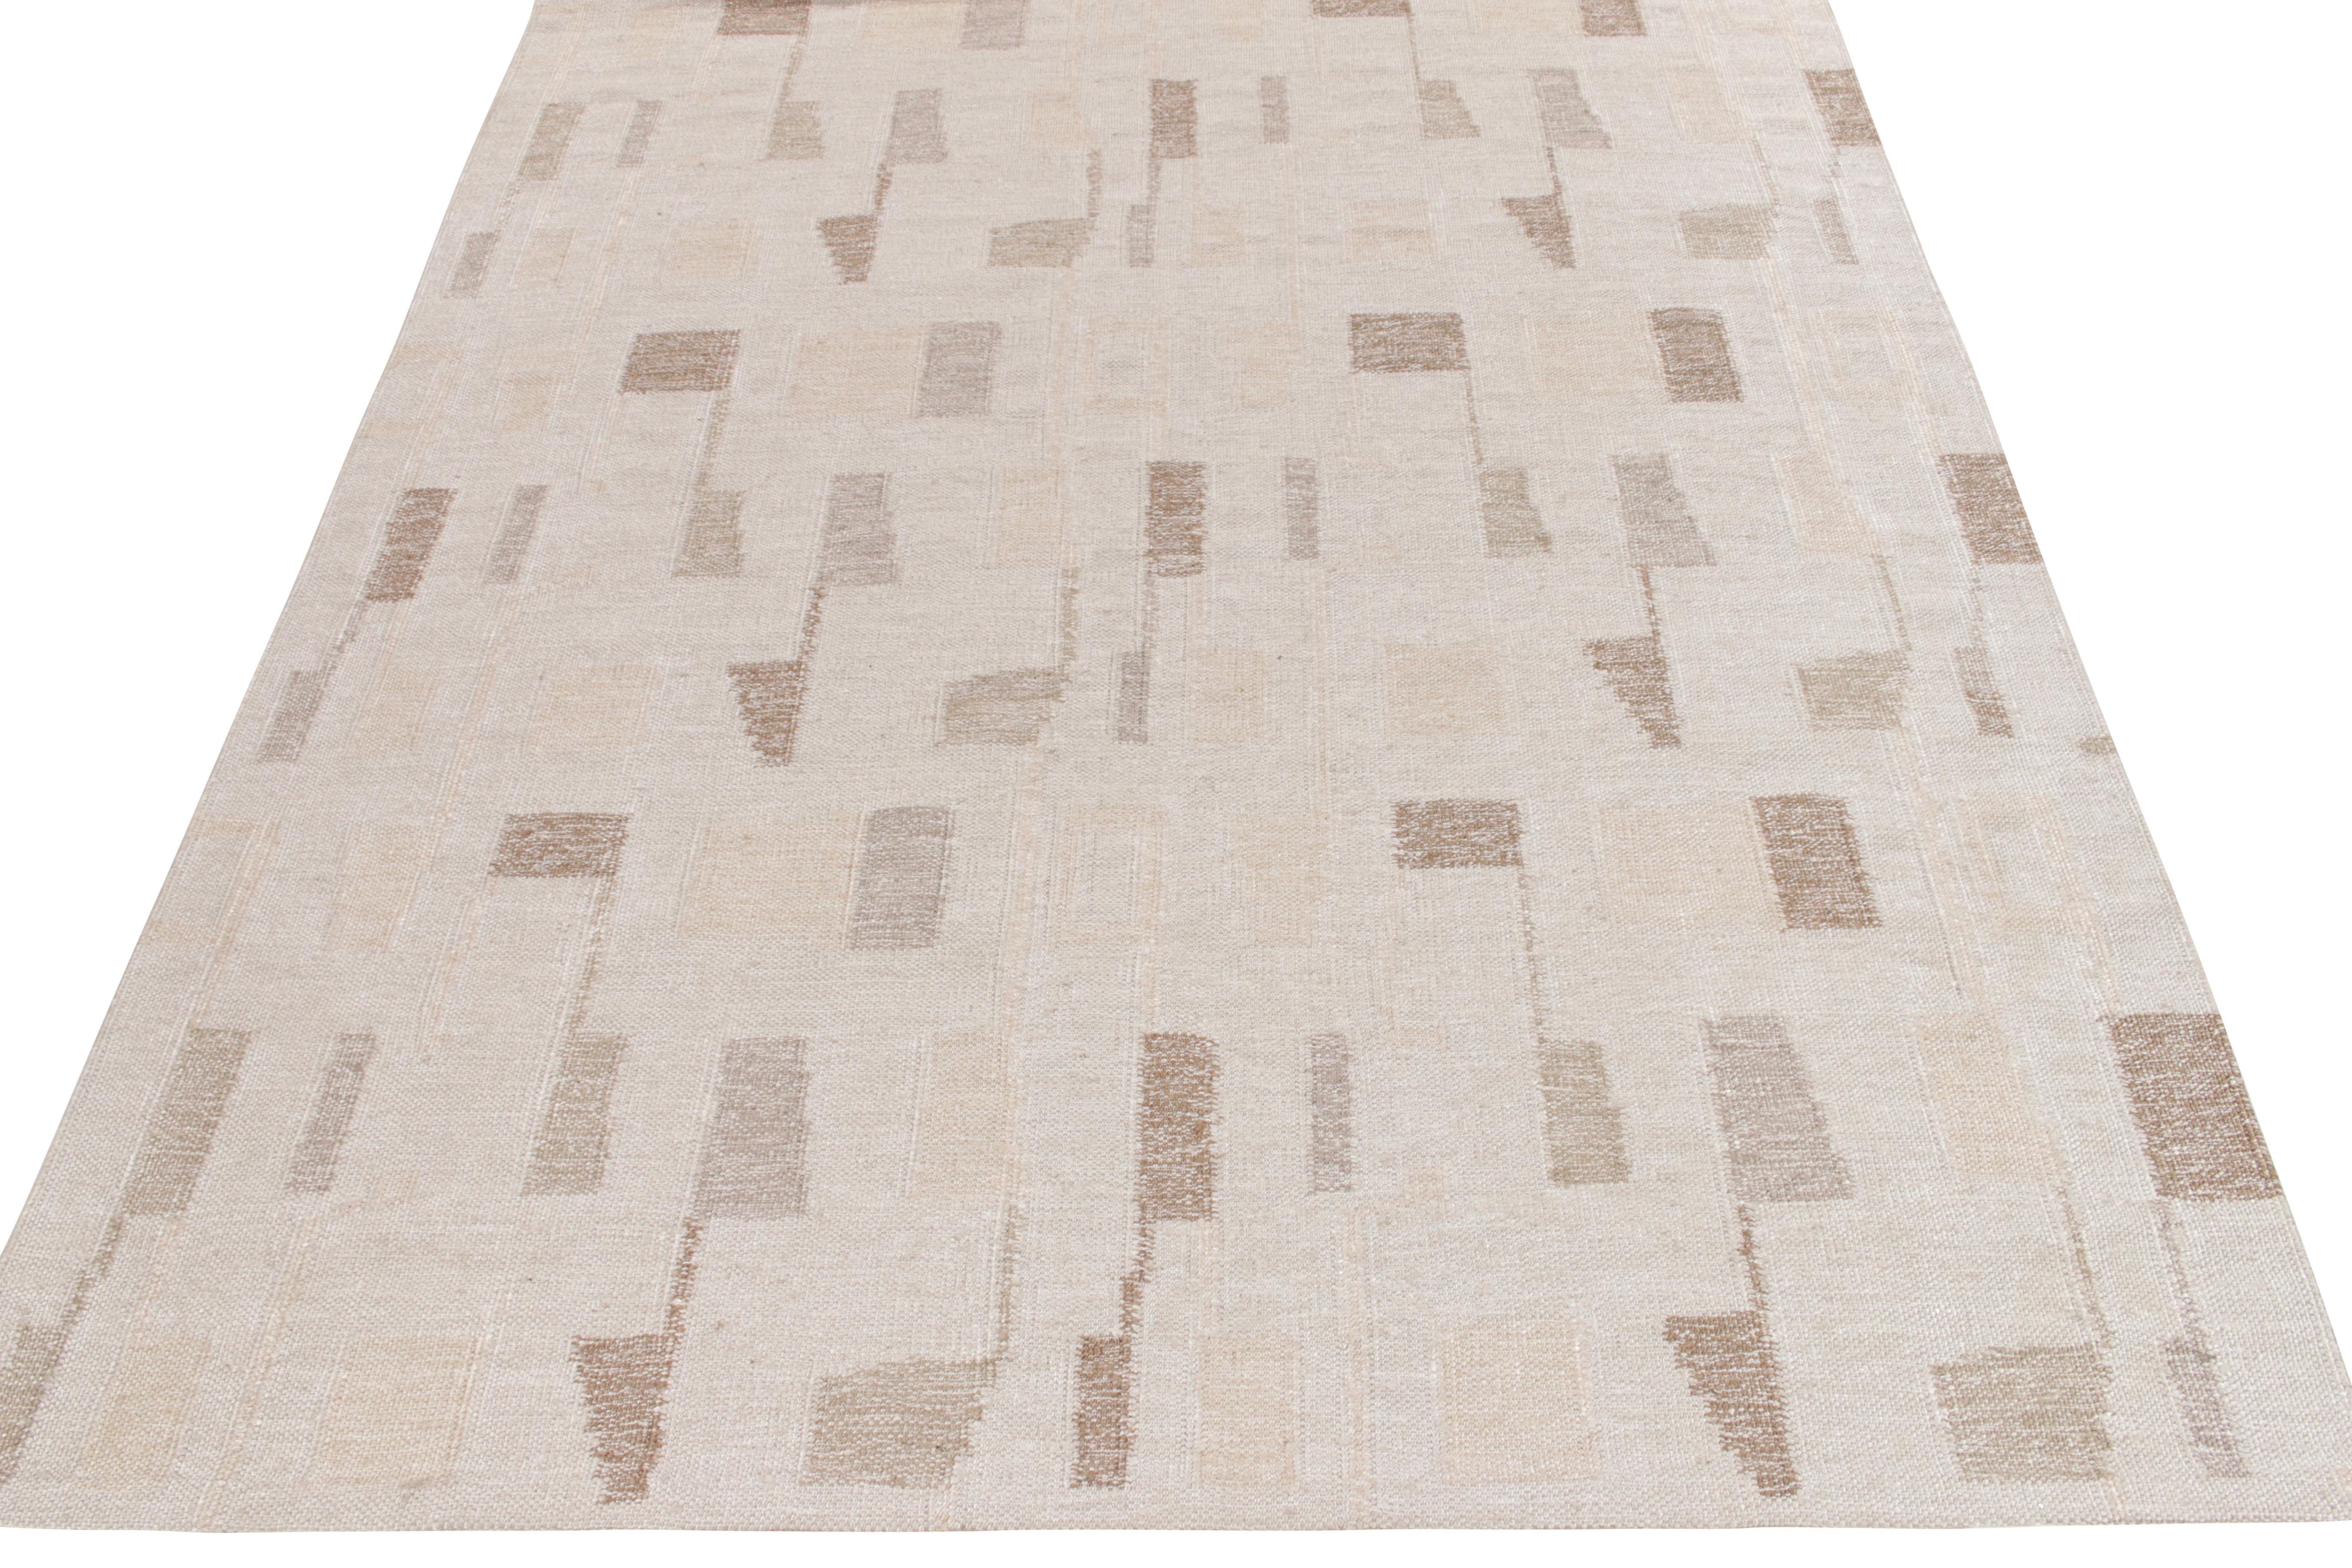 Handwoven in banana silk, Rug & Kilim presents an 8x10 Swedish flat weave inspiration from their award-winning Scandinavian Collection with a texture second to none, enjoying a geometric pattern resembling musical notes in a muted colorway of beige,